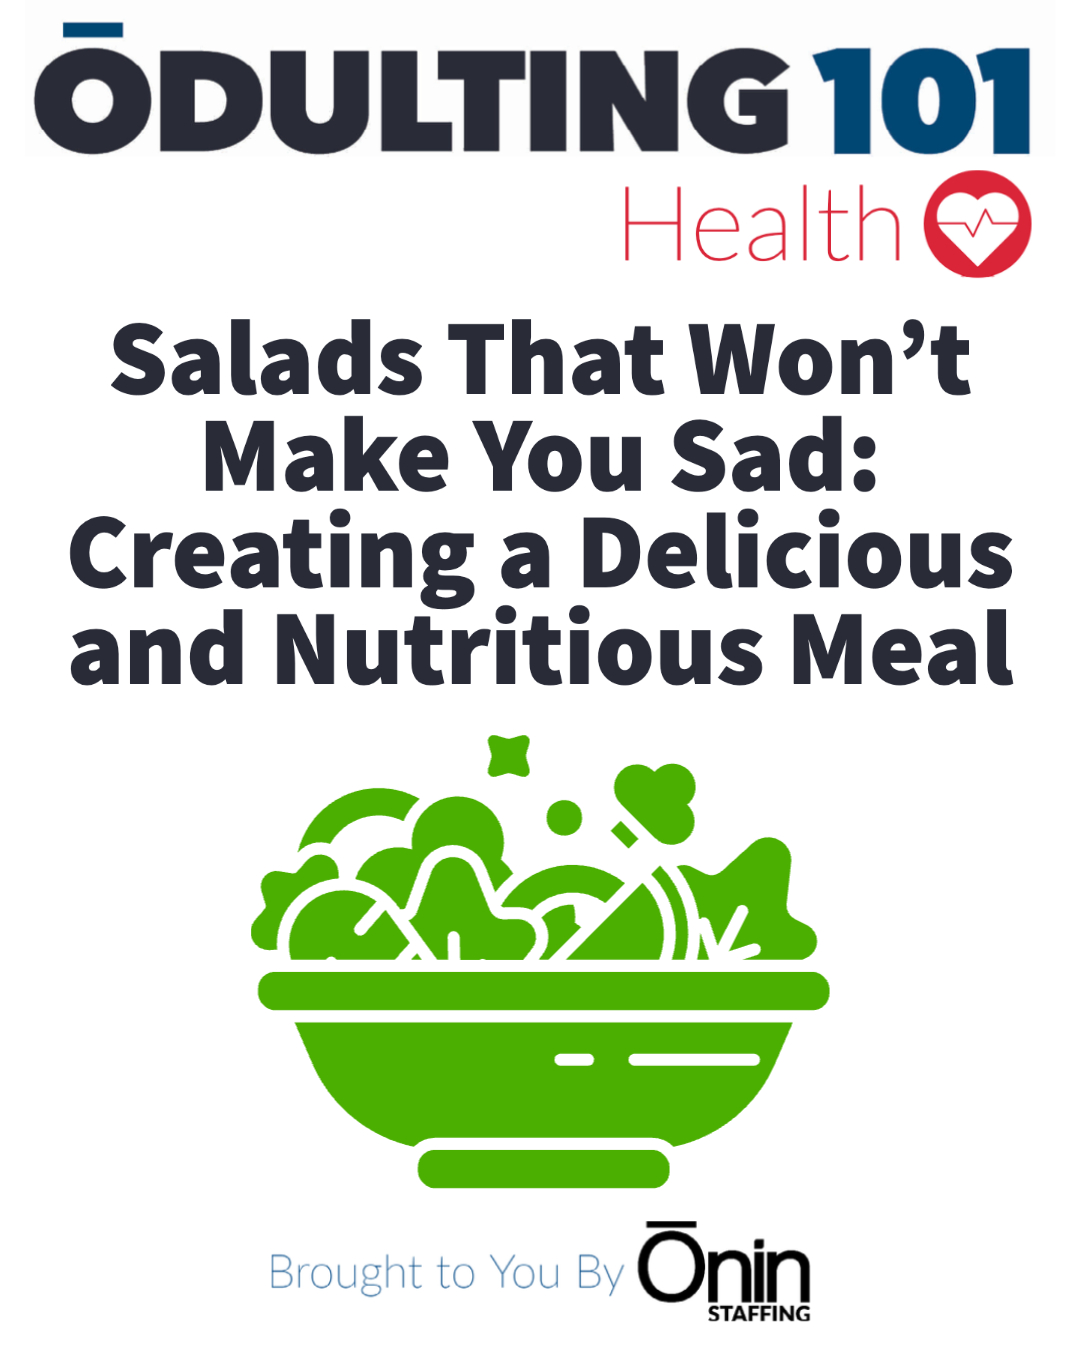 Odulting Health series image featuring a blog post titled "Salads That Won't Make You Sad: Creating a Delicious and Nutritious Meal" with a green line drawing of a salad bowl and Onin Staffing watermark.